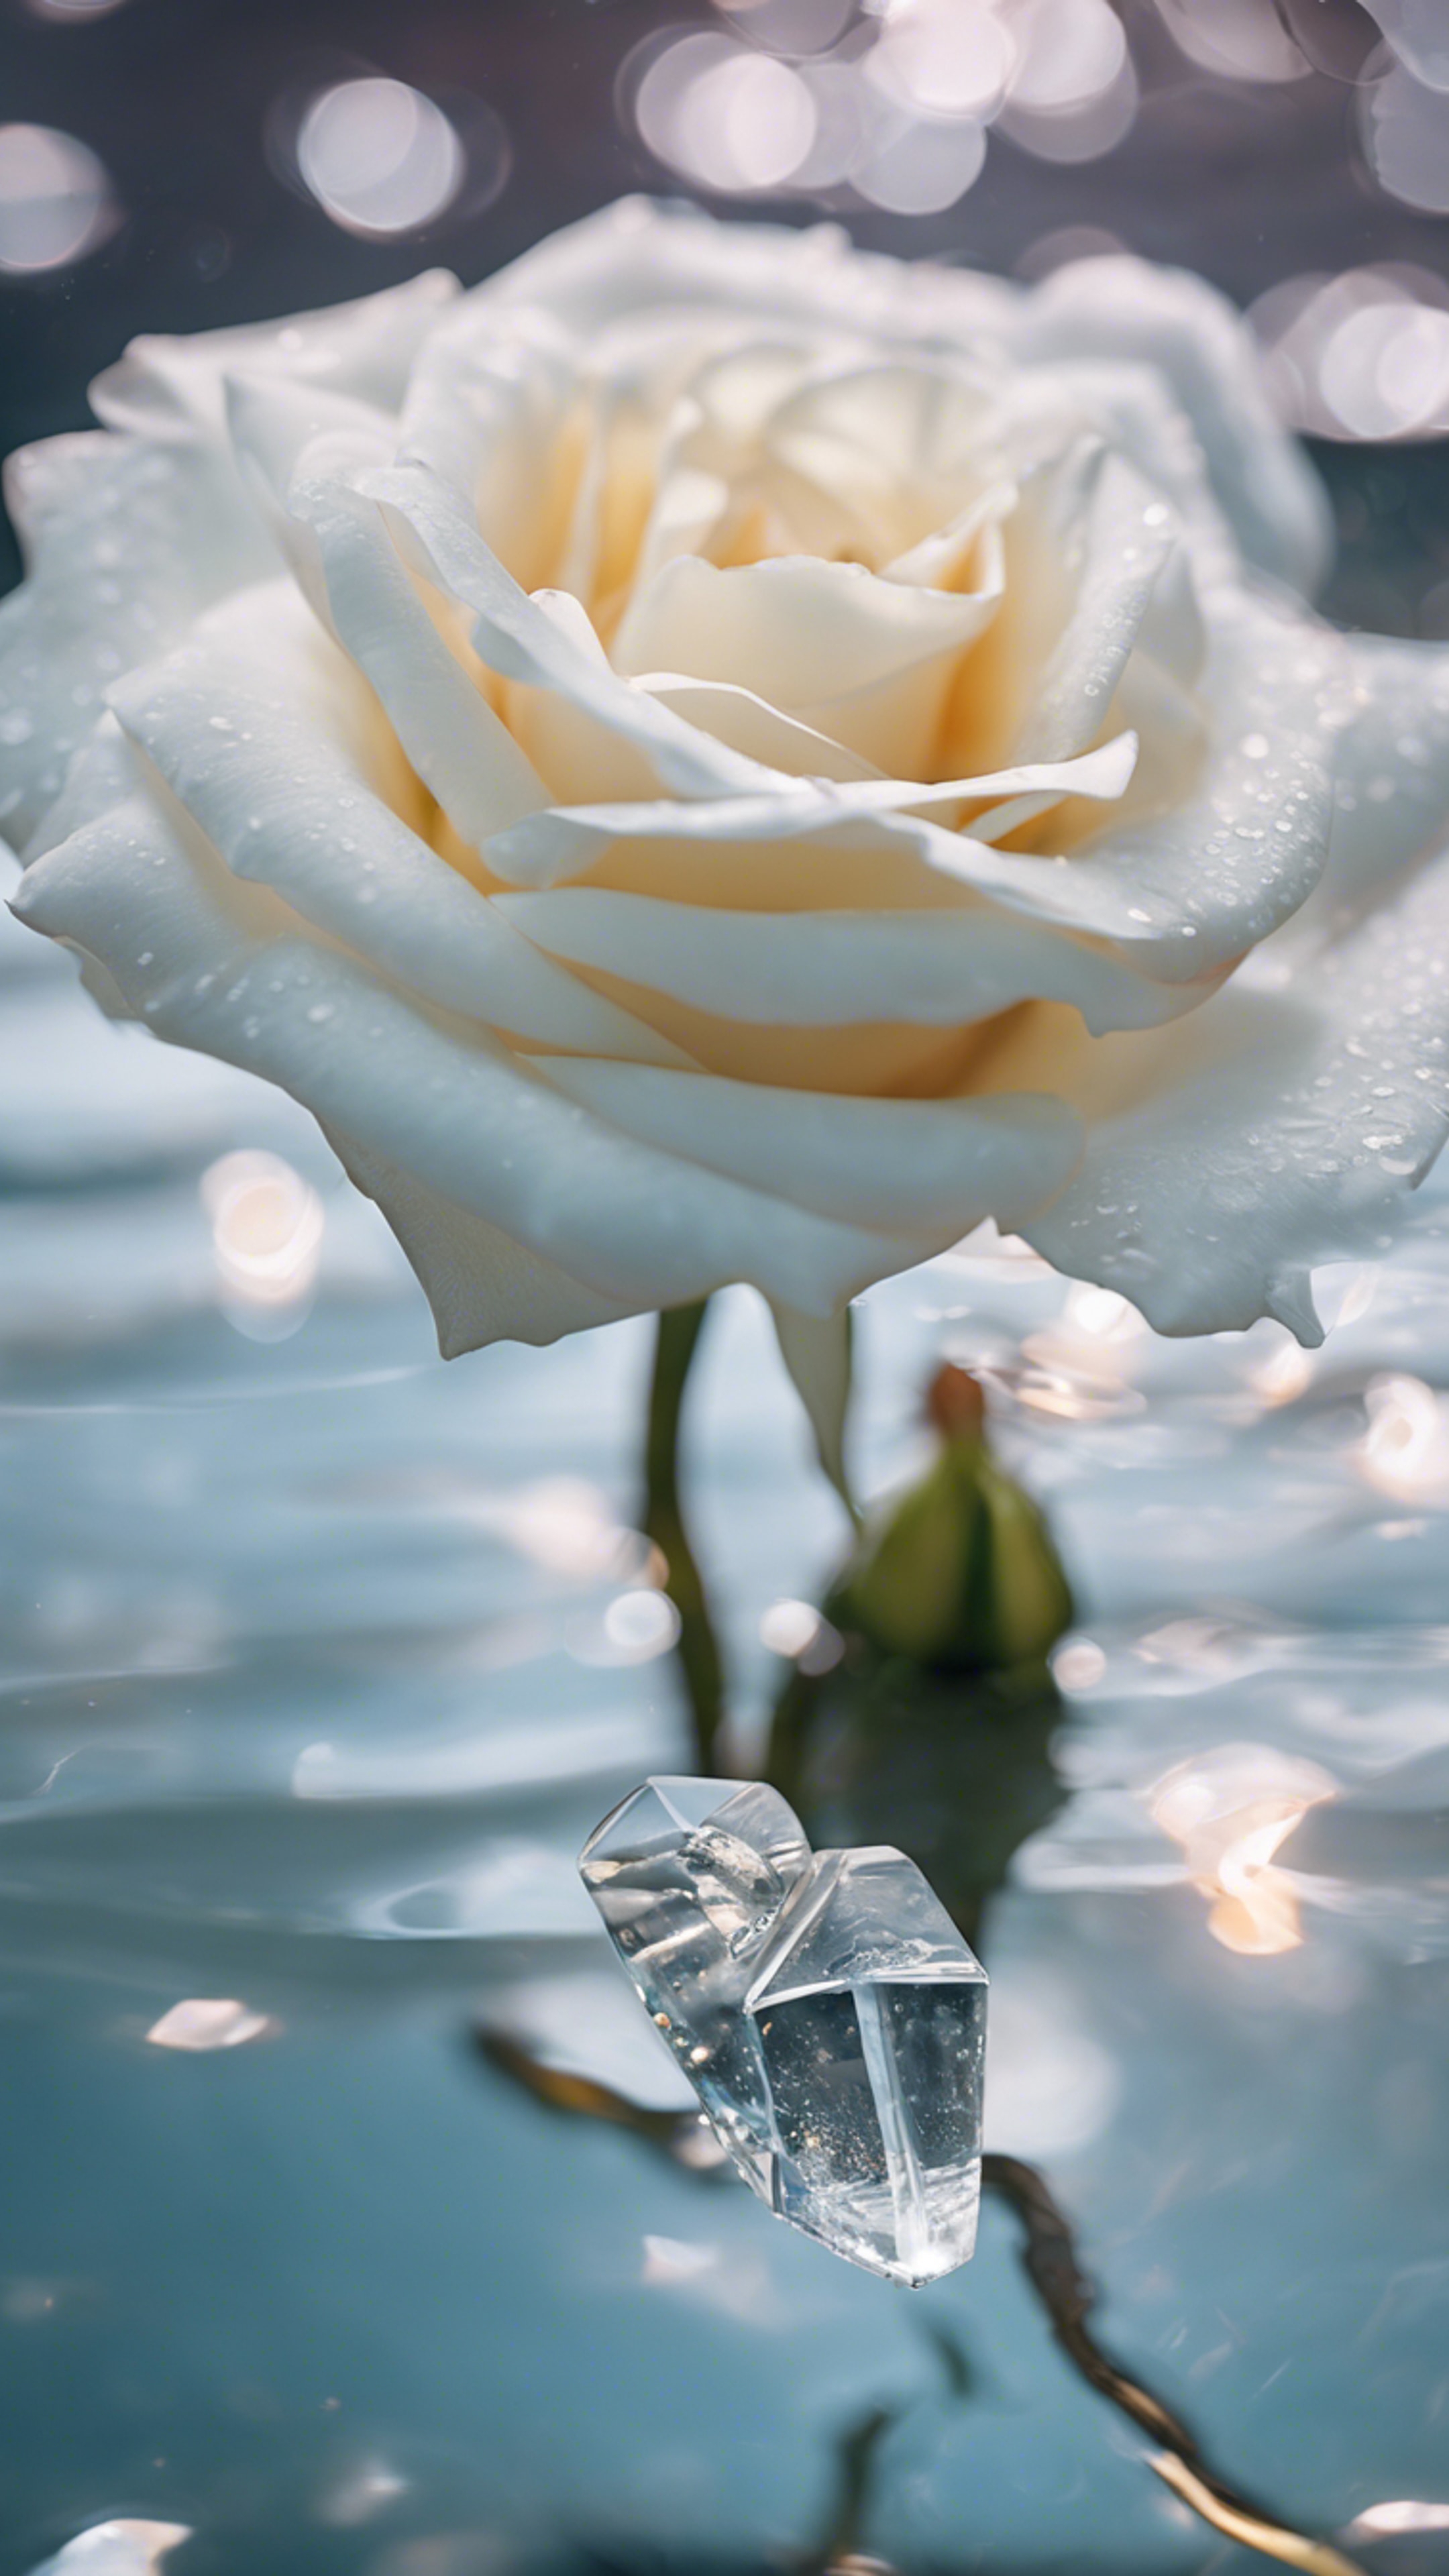 A white rose submerged in clear crystal water, petals gracefully spreading. Fondo de pantalla[af81d3e8e21443b29805]